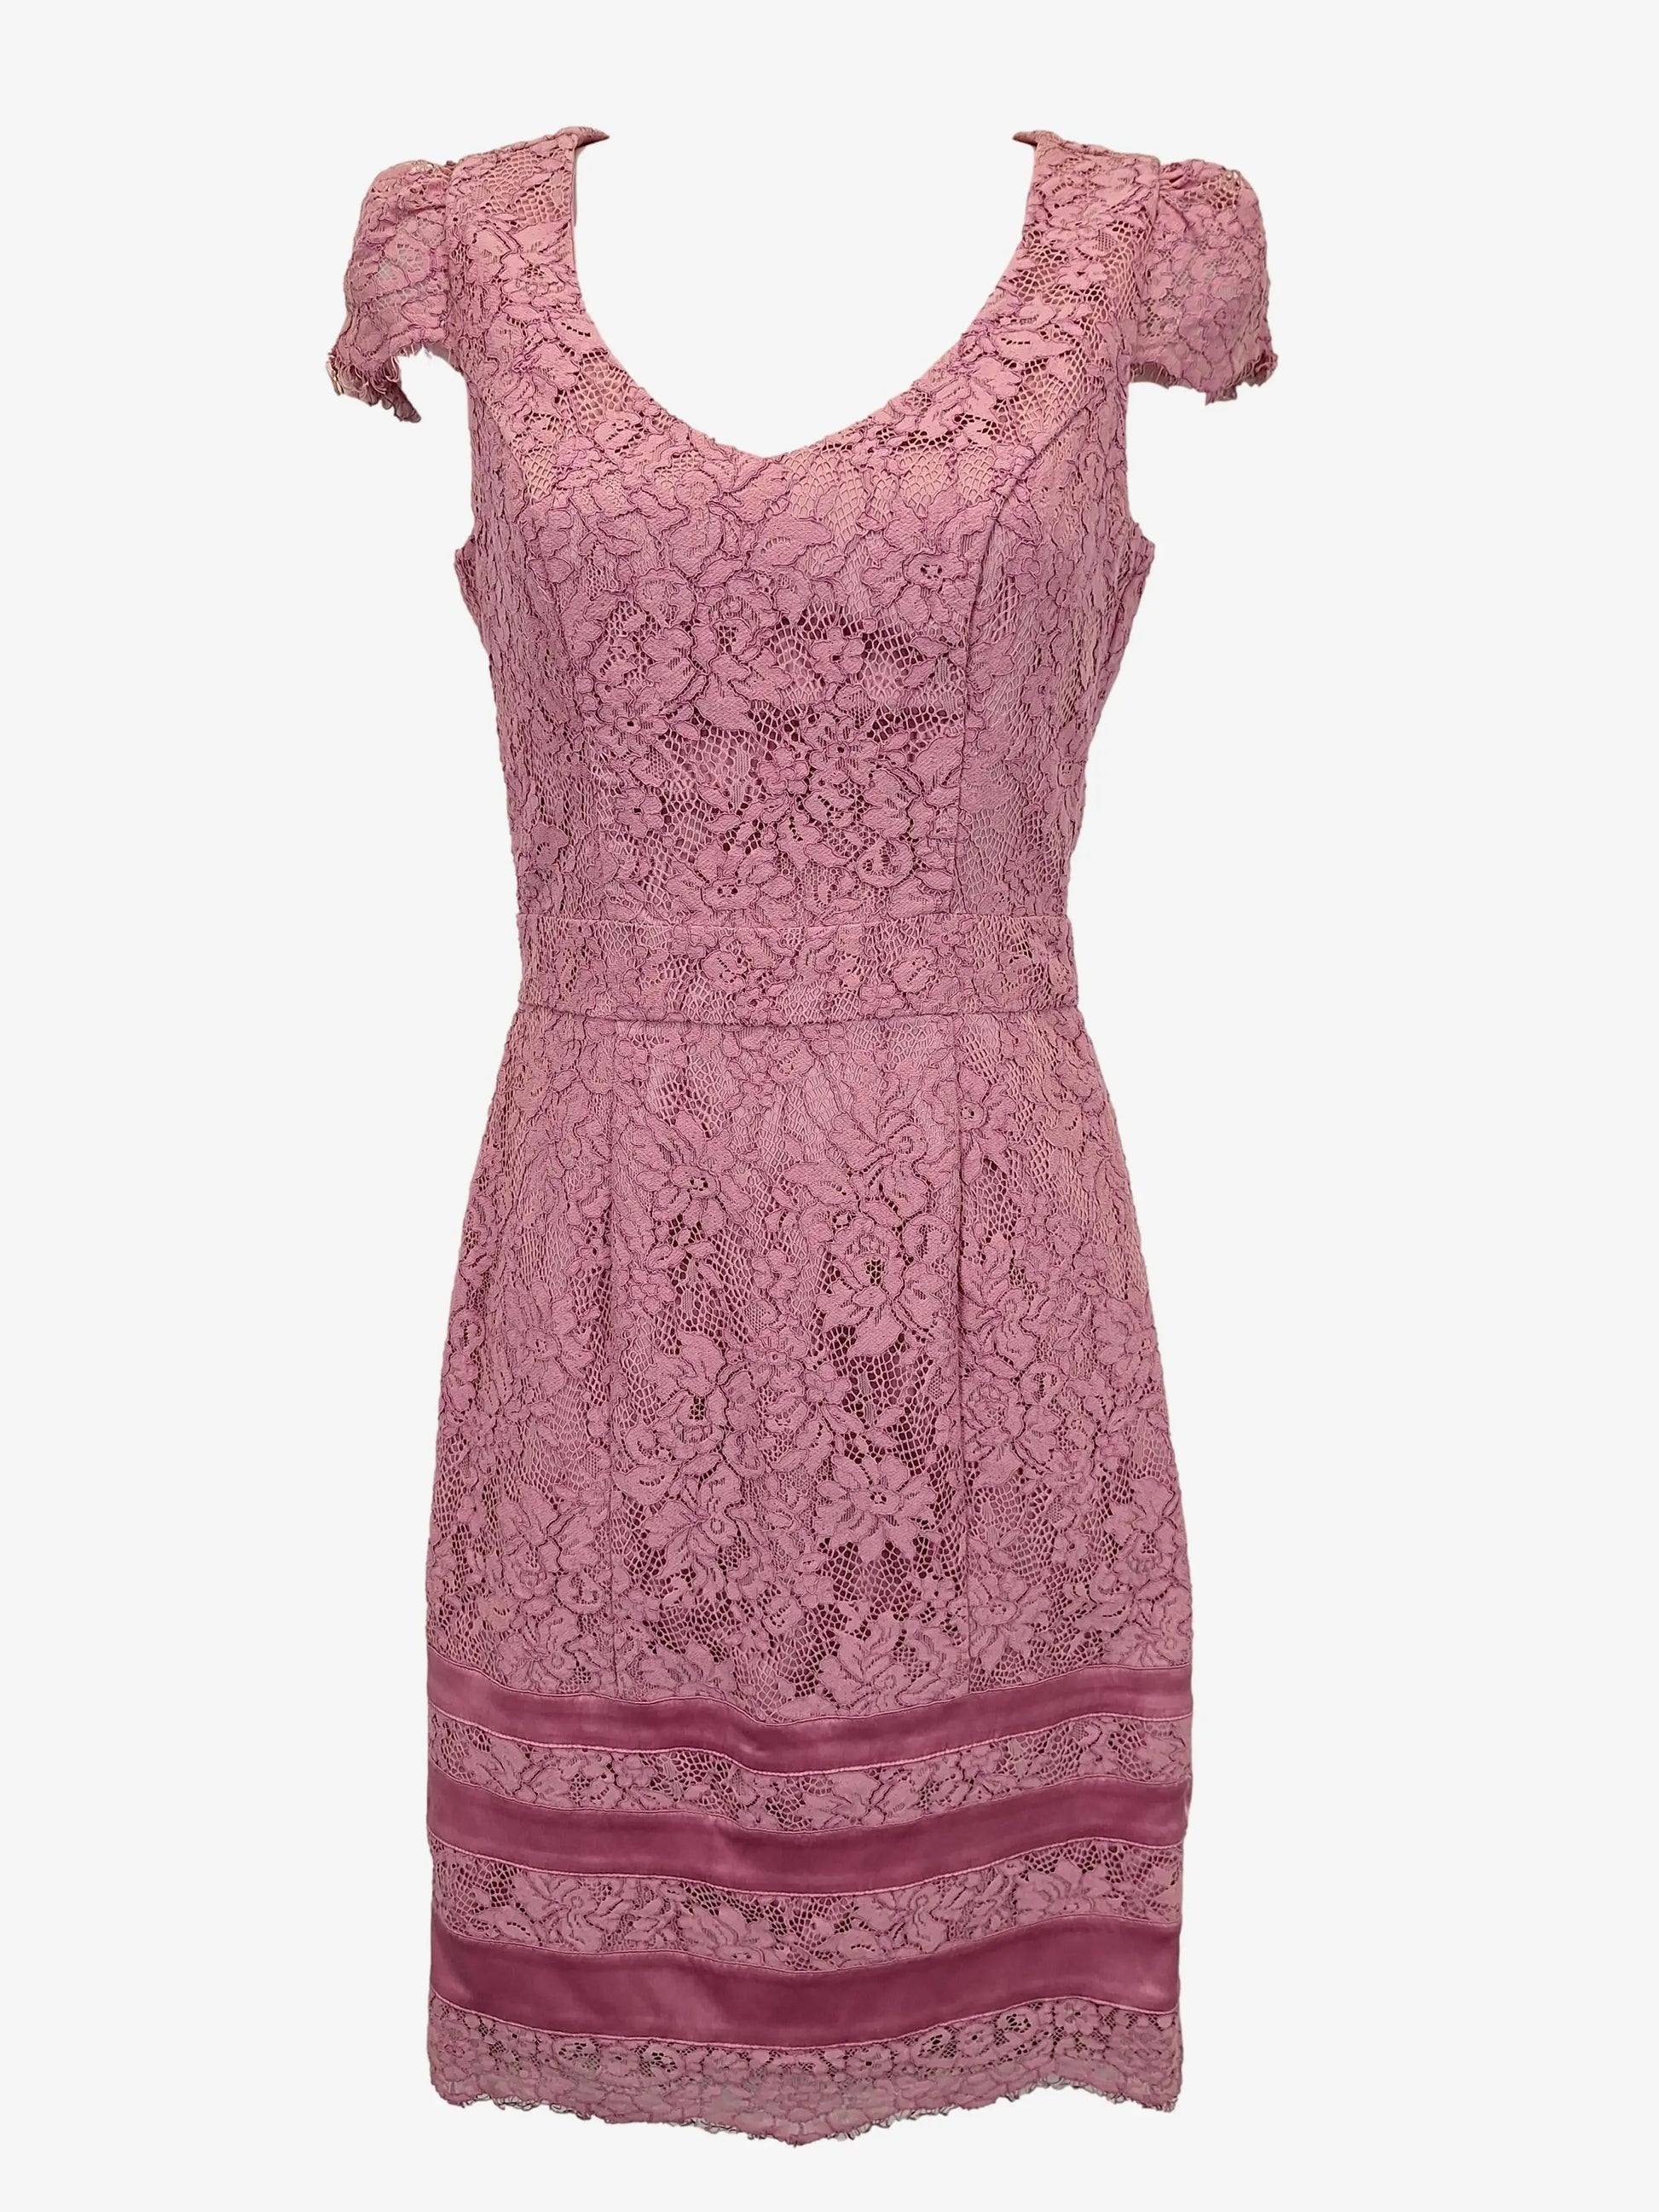 Review Blush Lace Midi Dress Size 6 by SwapUp-Online Second Hand Store-Online Thrift Store